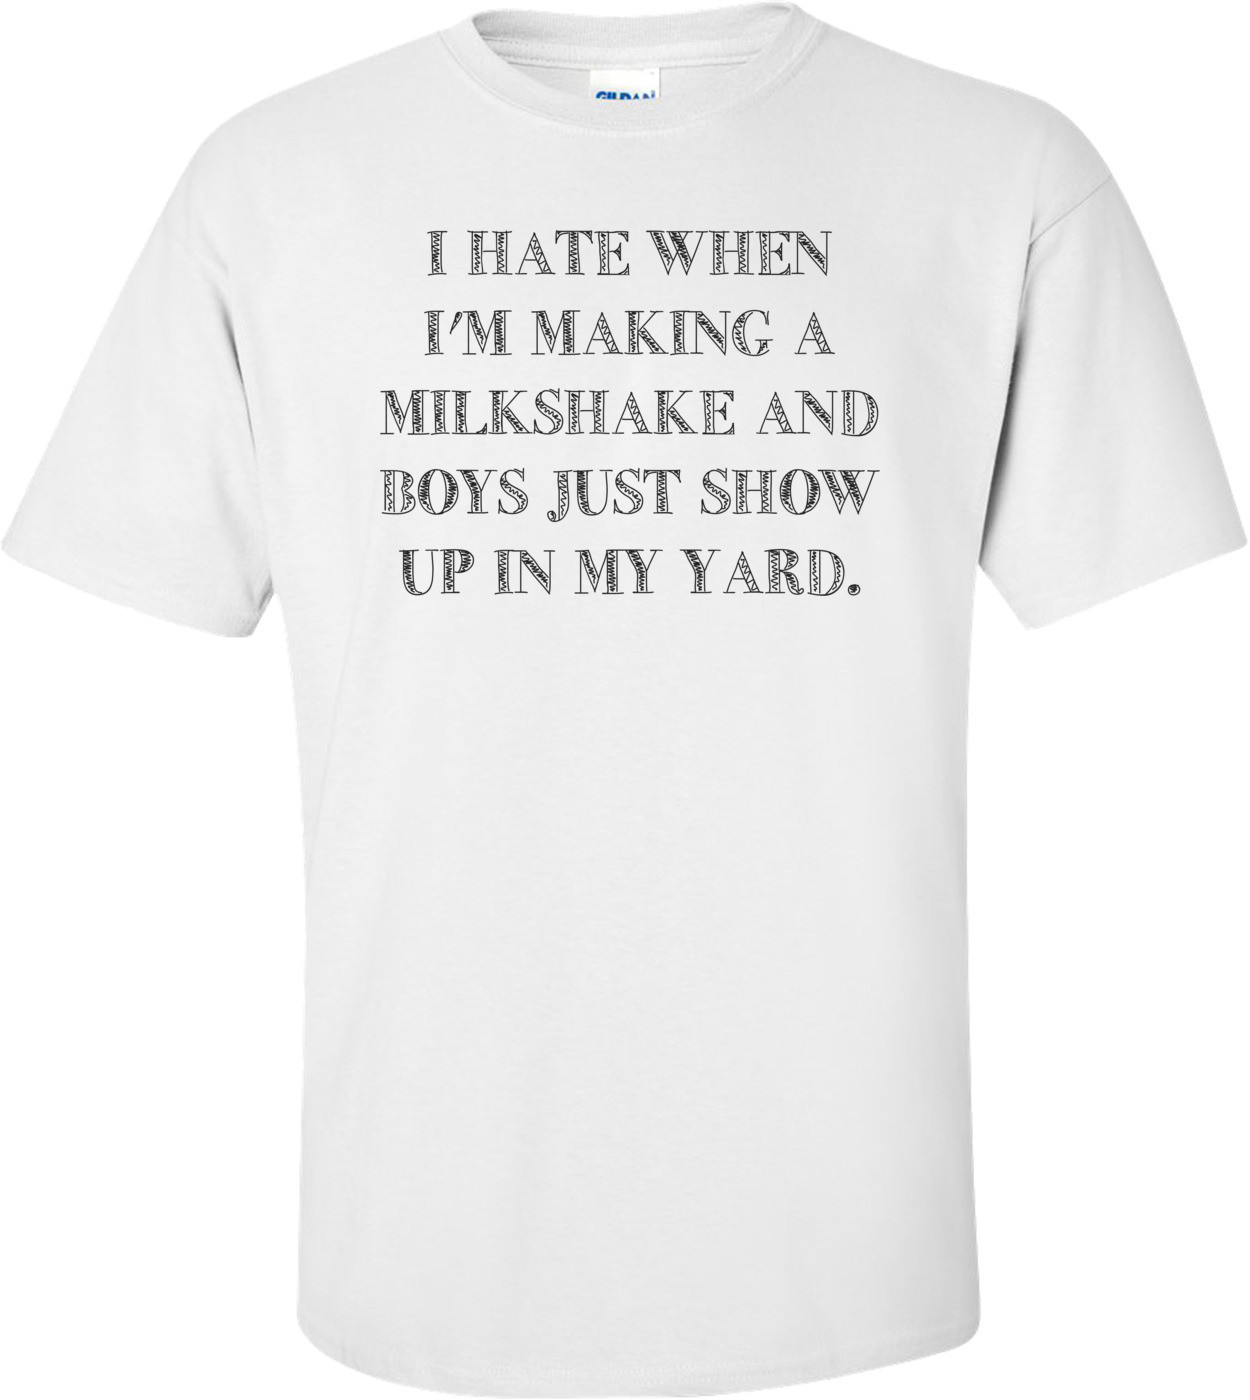 I Hate When I'm Making A Milkshake And Boys Just Show Up In My Yard. Shirt